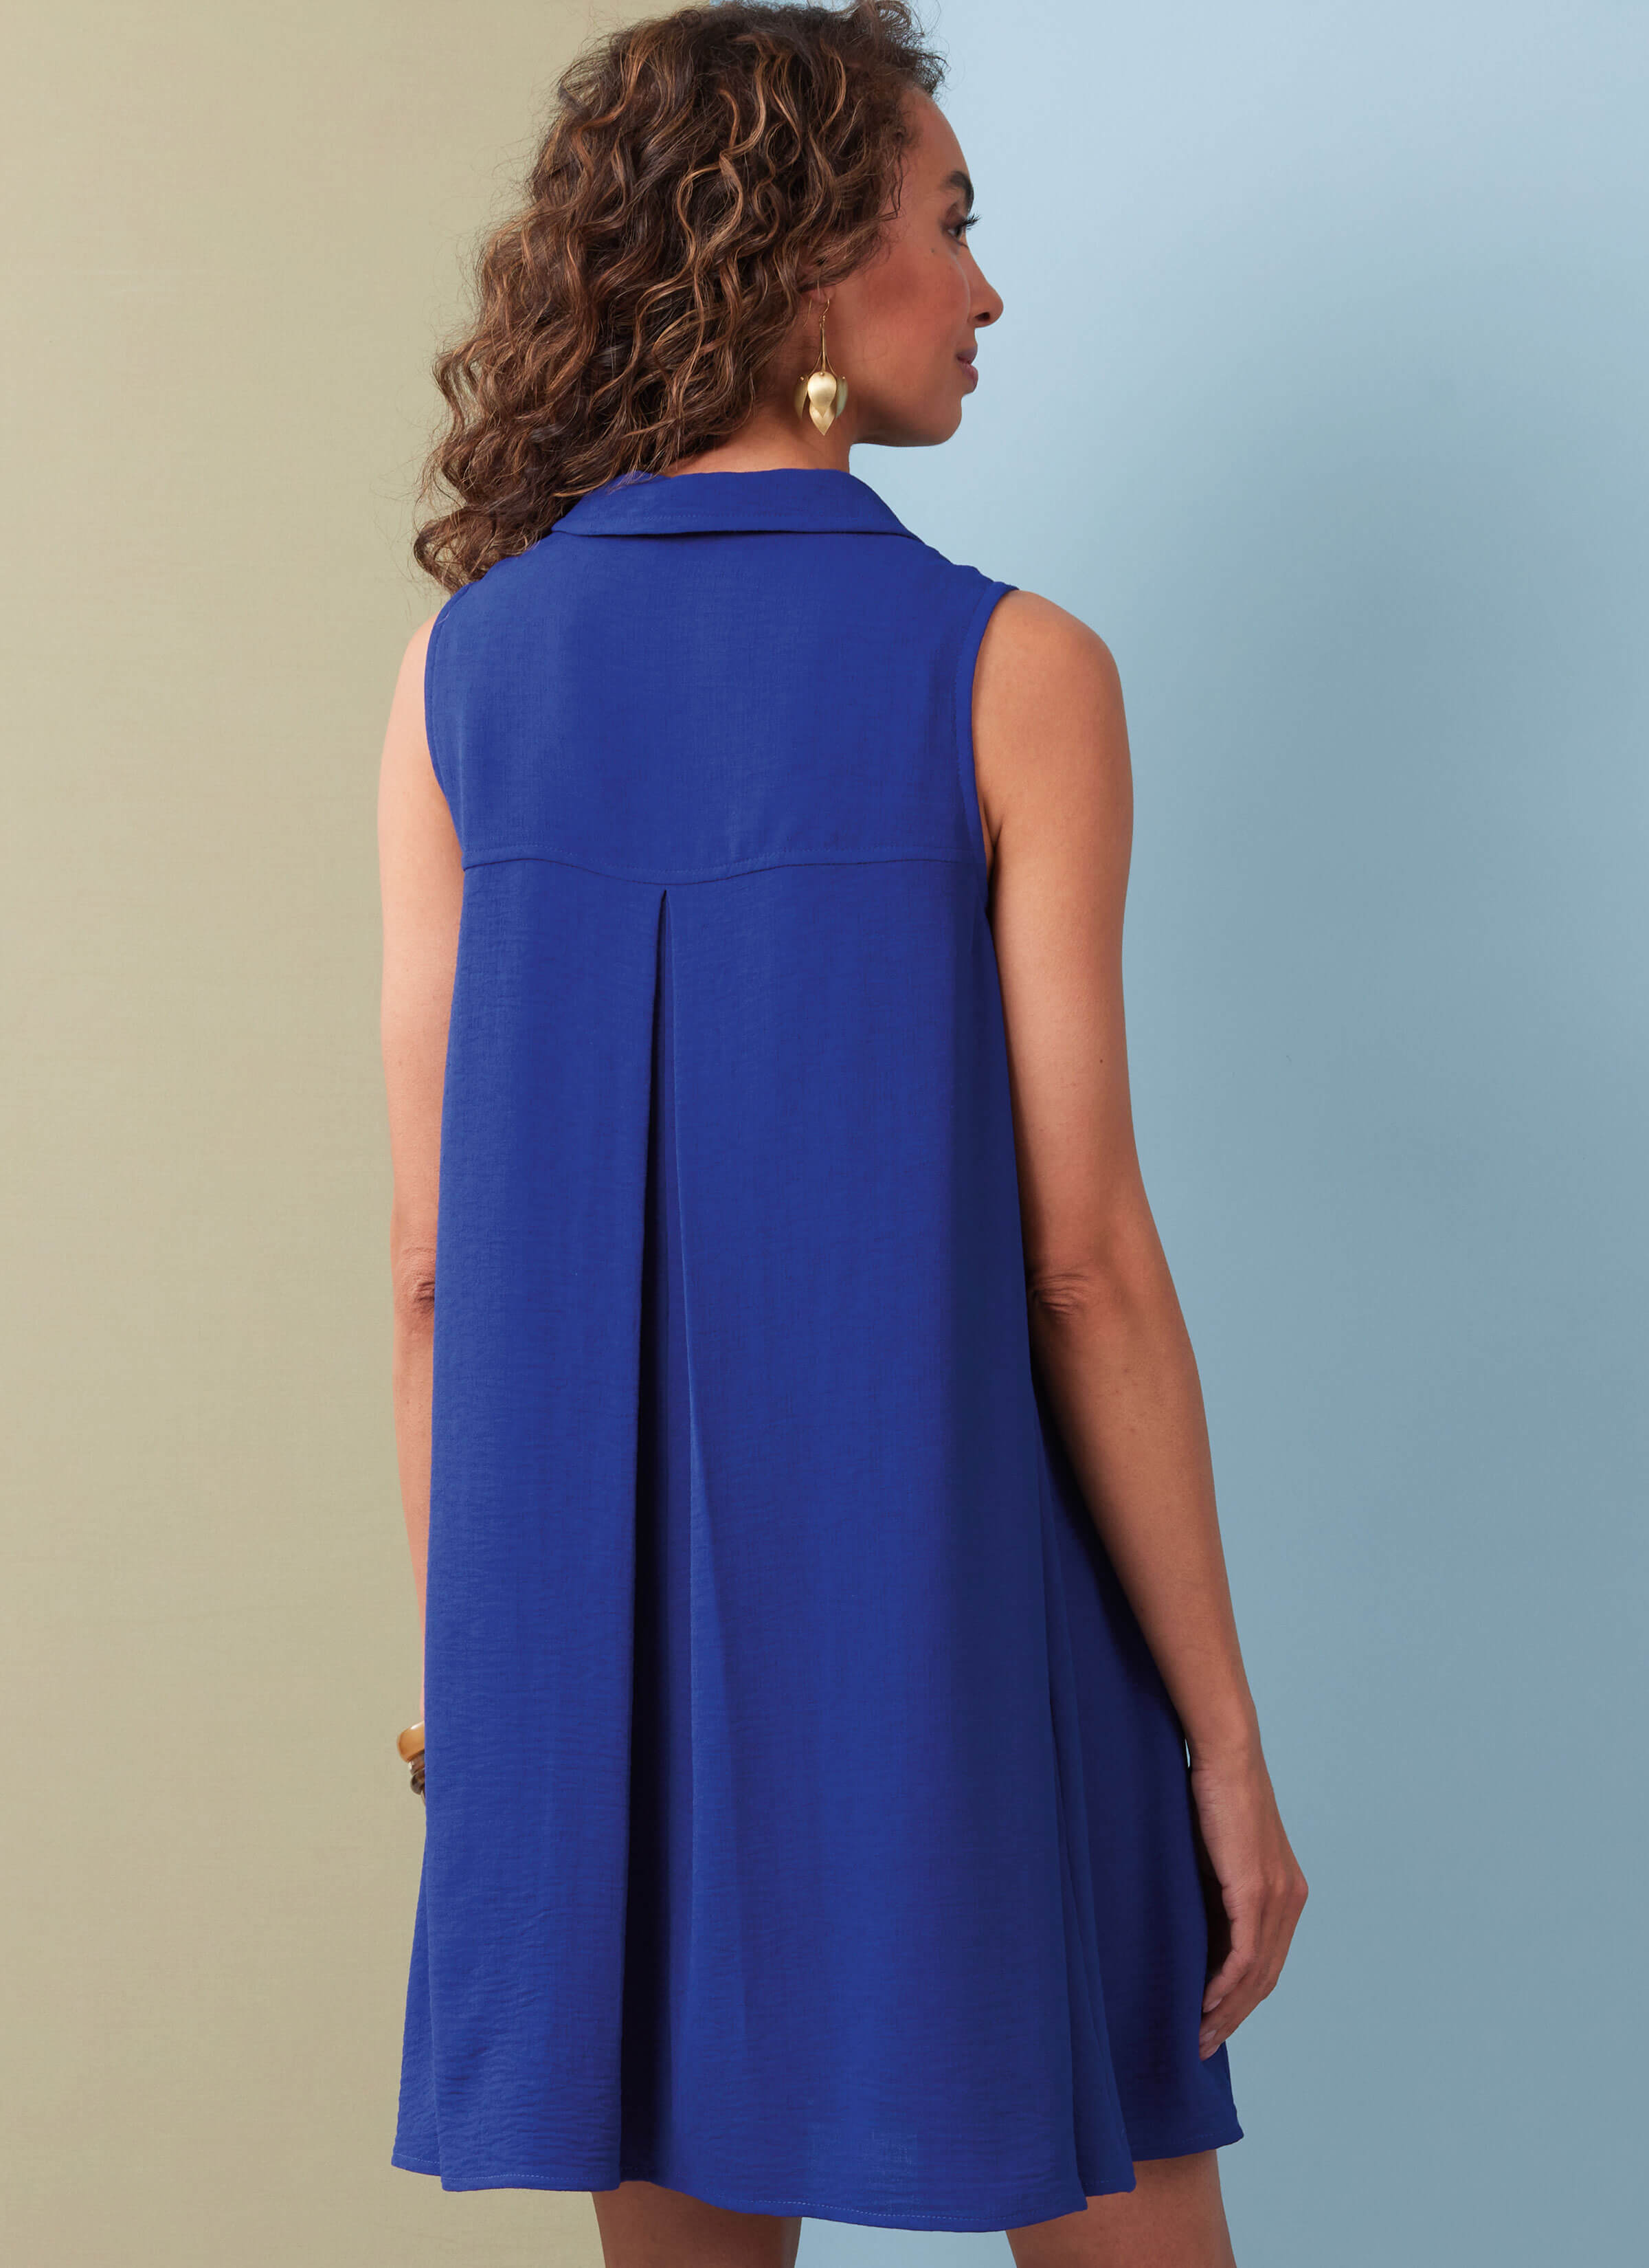 Butterick Sewing Pattern B6994 Misses' Dress in Two Lengths